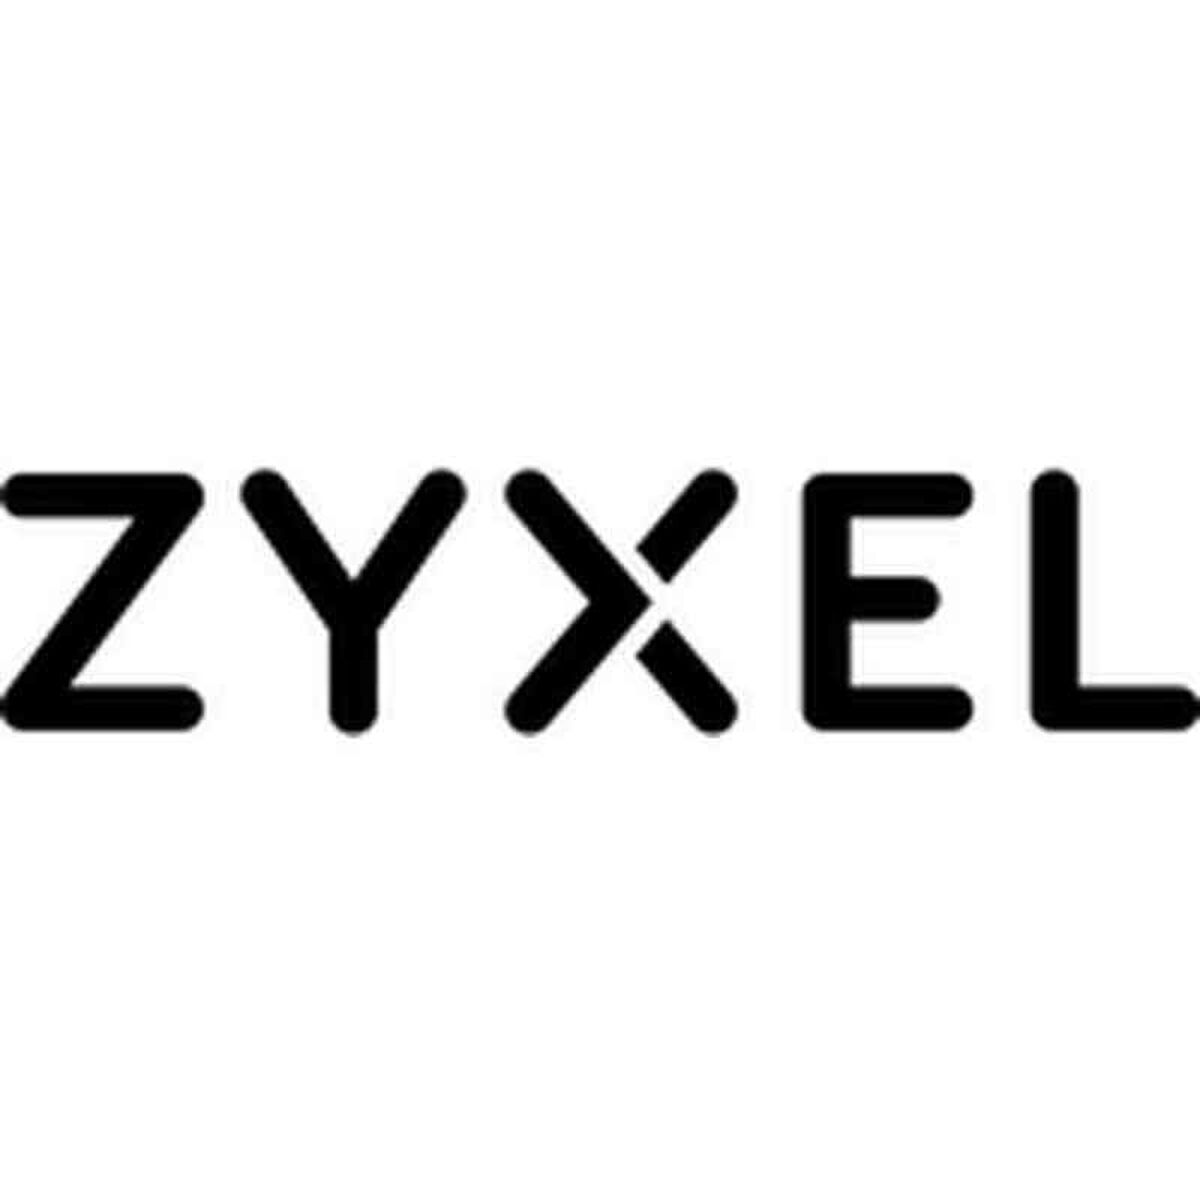 Firewall ZyXEL ATP100 LAN 300-1000 Mbps, ZyXEL, Computing, Network devices, firewall-zyxel-atp100-lan-300-1000-mbps, Brand_ZyXEL, category-reference-2609, category-reference-2803, category-reference-2826, category-reference-t-19685, category-reference-t-19914, Condition_NEW, networks/wiring, Price_700 - 800, Teleworking, RiotNook